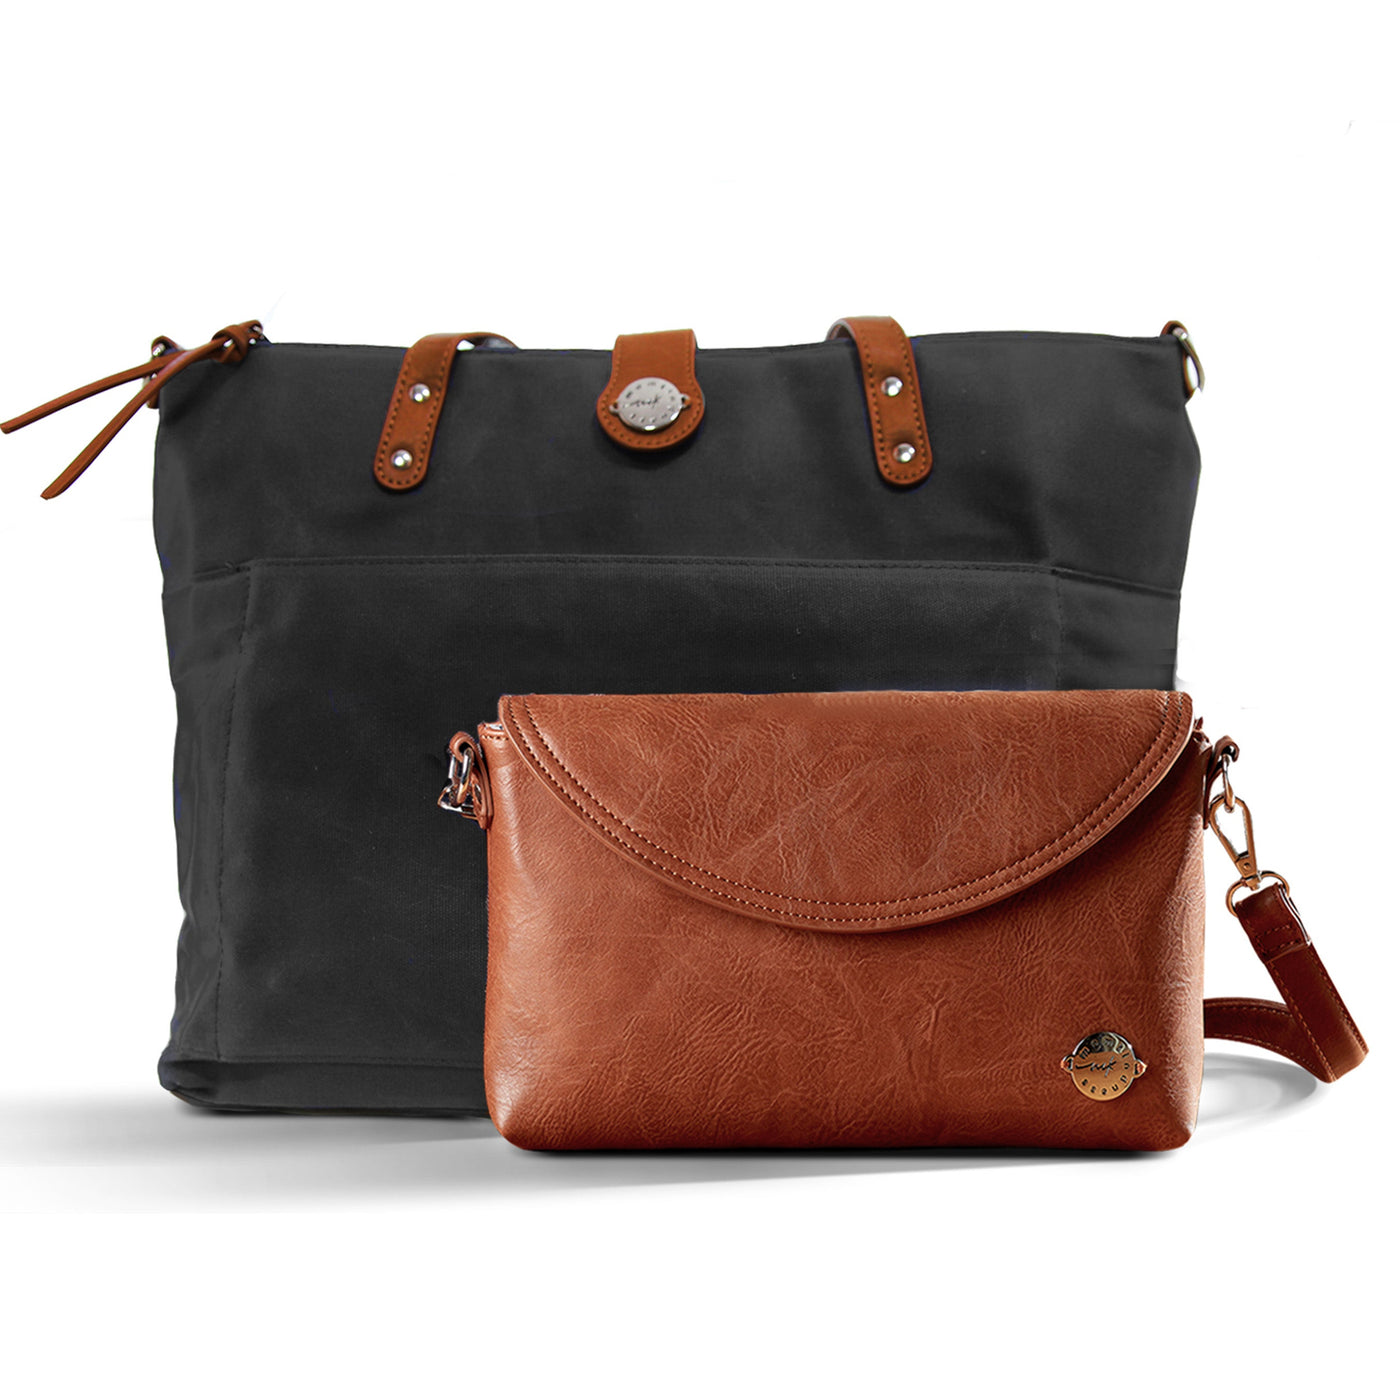 Black canvas tote bag with brown vegan leather accents and brown vegan leather diaper clutch, all on a white background.